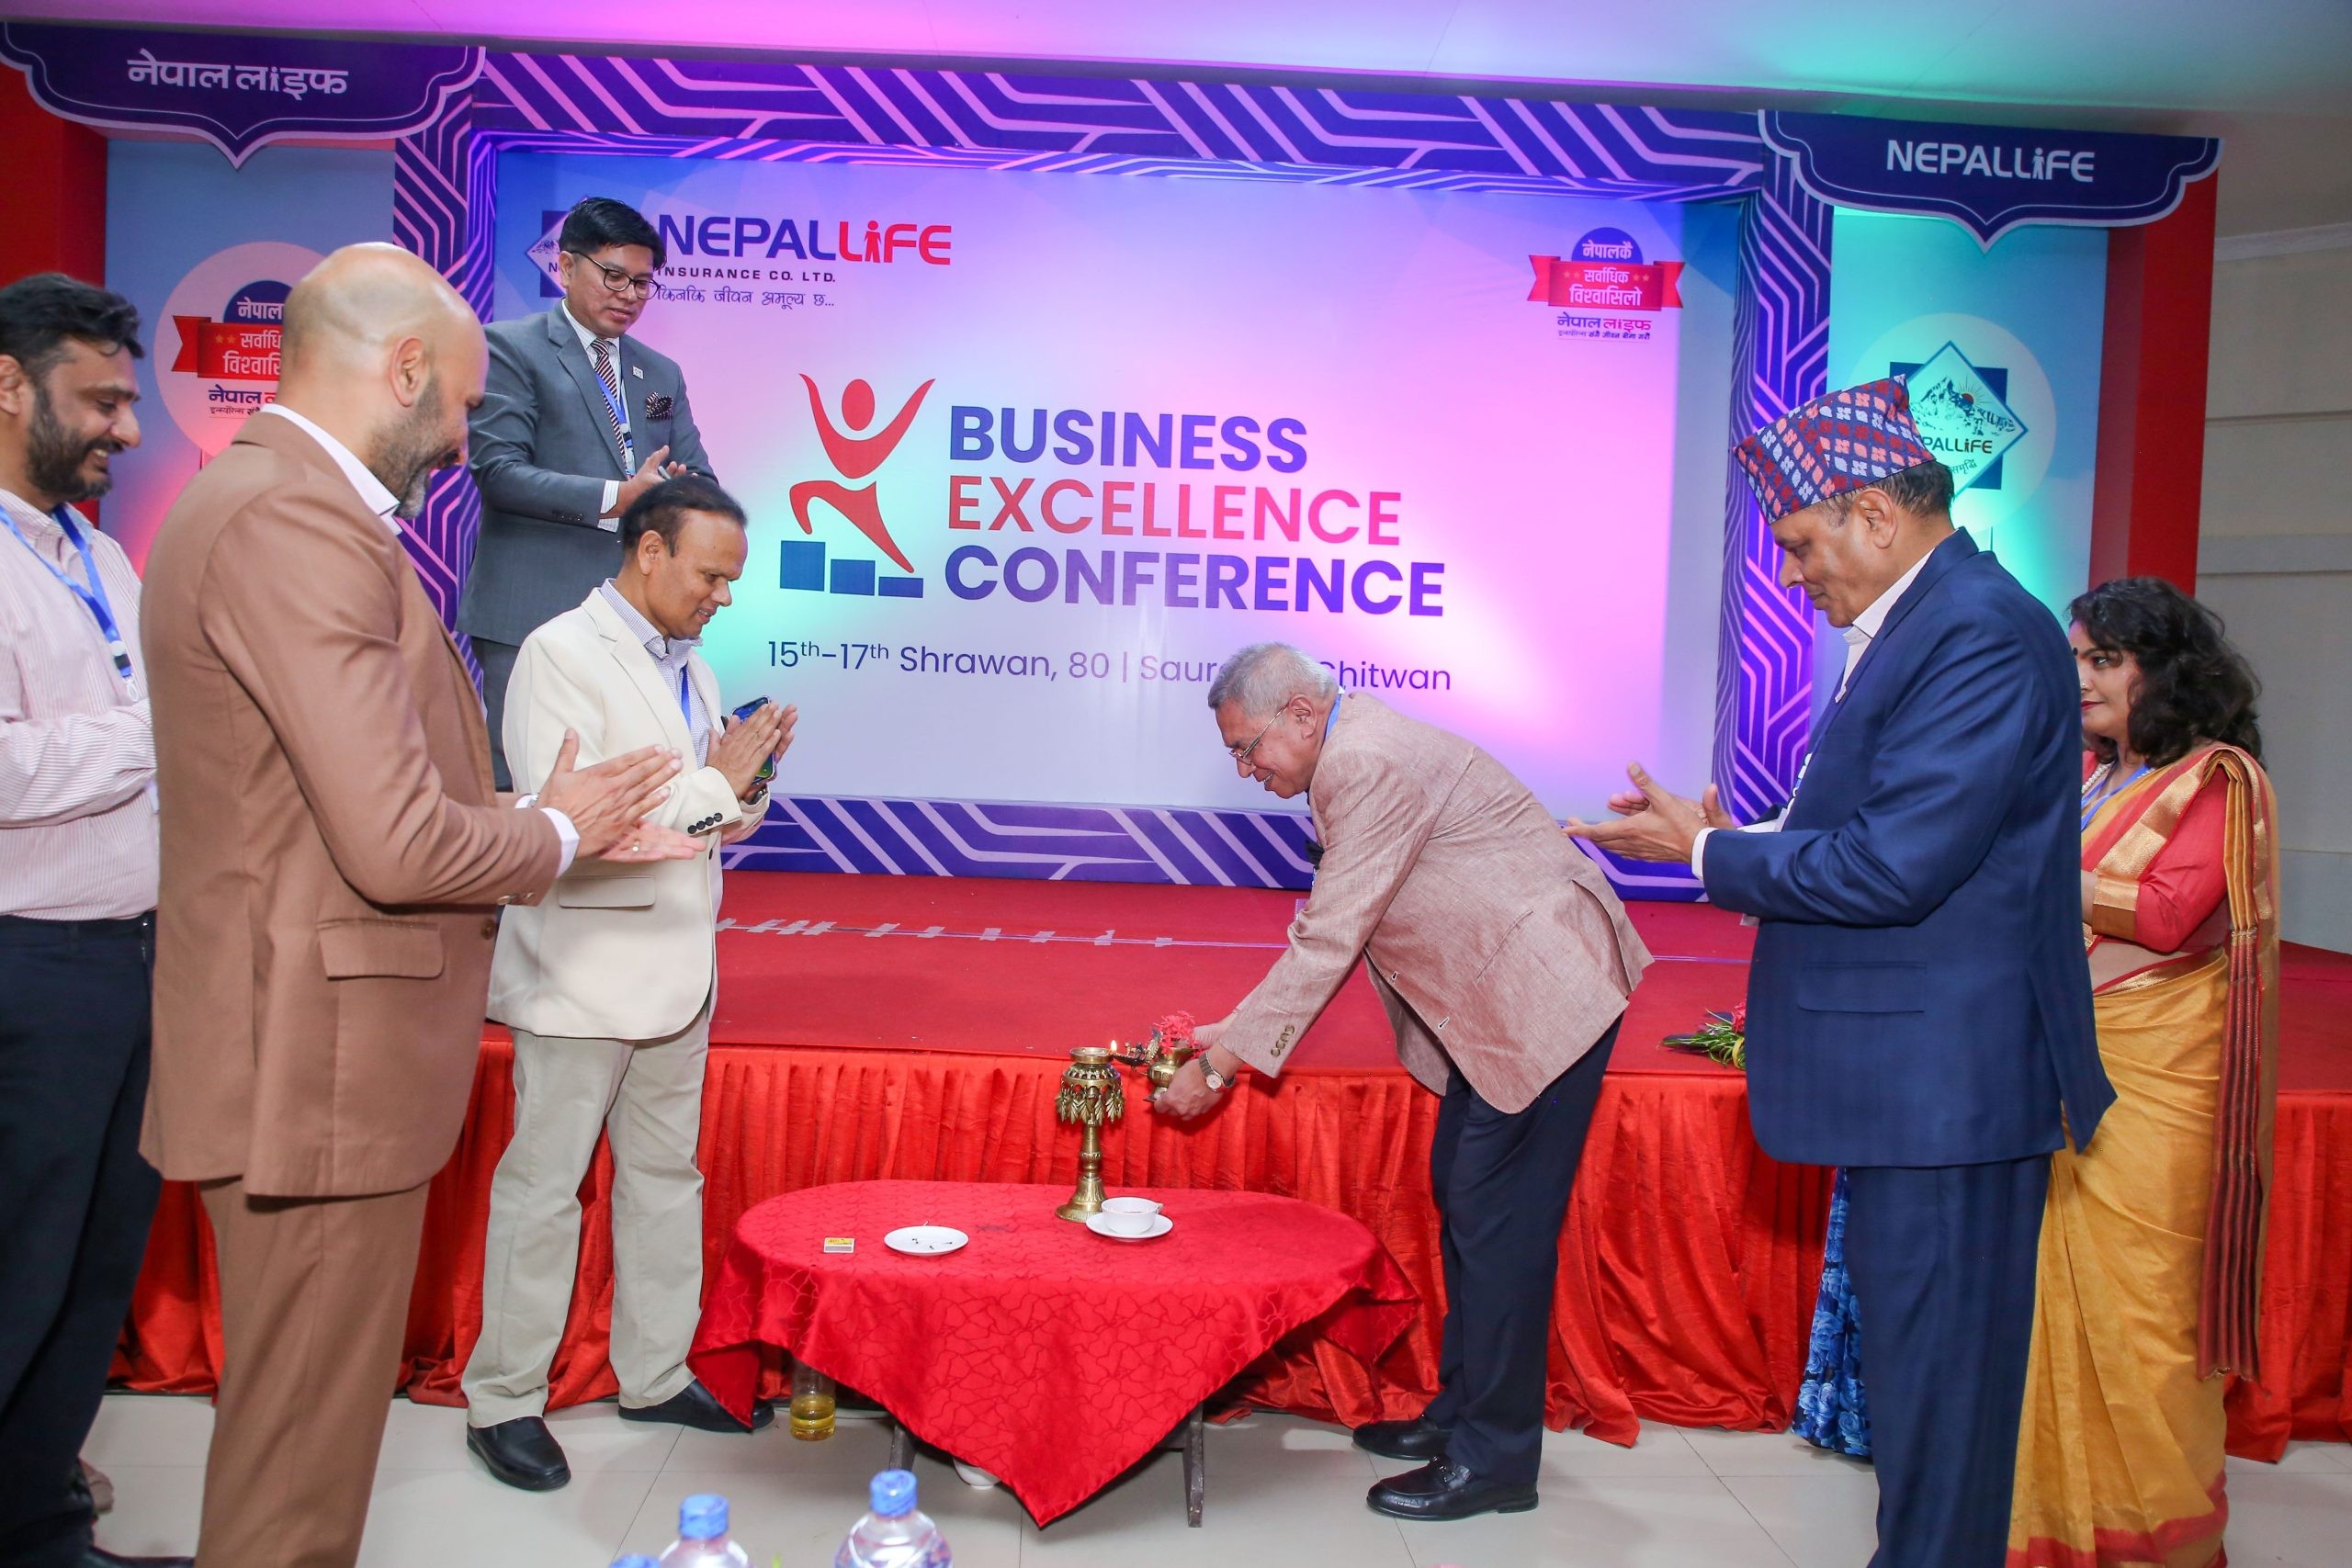 Nepal Life Insurance's 'Business Excellence Conference' Completed with grandeur, honors and awards in 37 categories